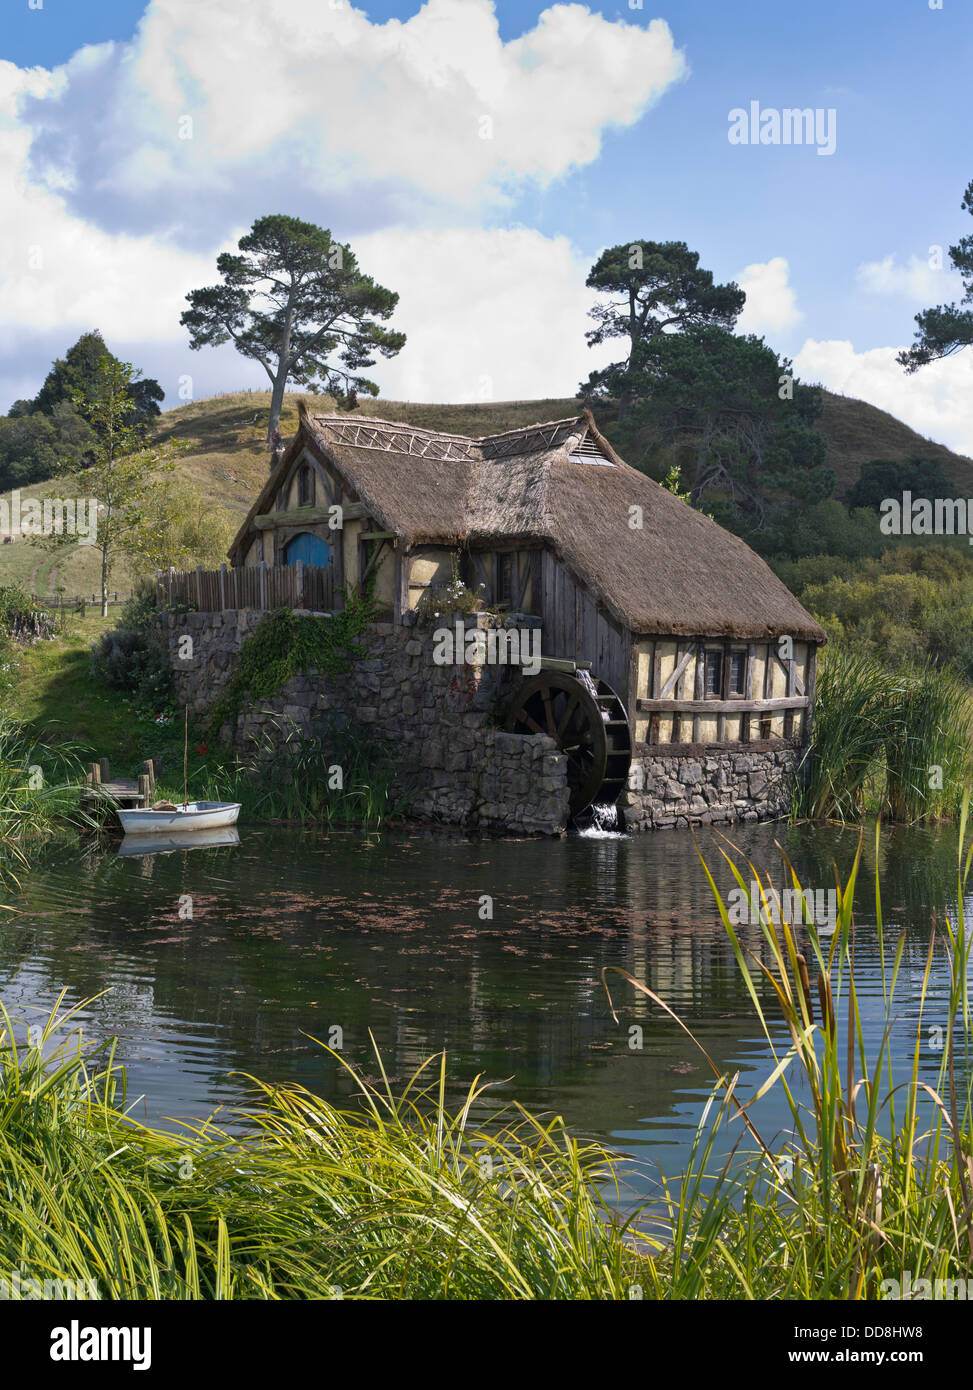 dh Lord of the Rings HOBBITON NEW ZEALAND Hobbits mill film set movie site films hobbit Stock Photo